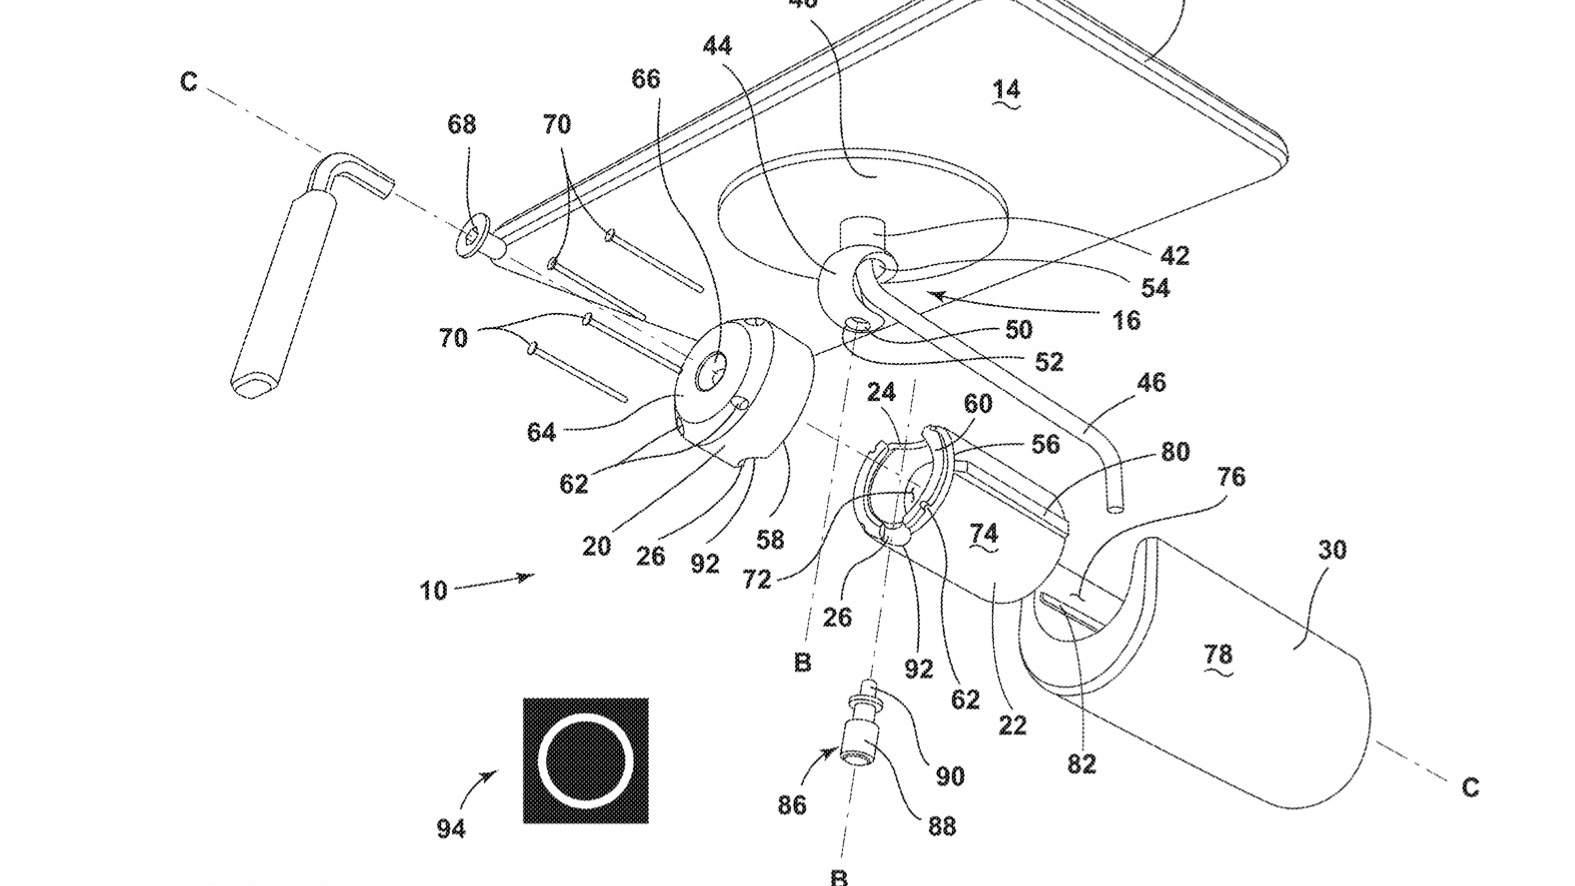 Ford swiveling display patent image